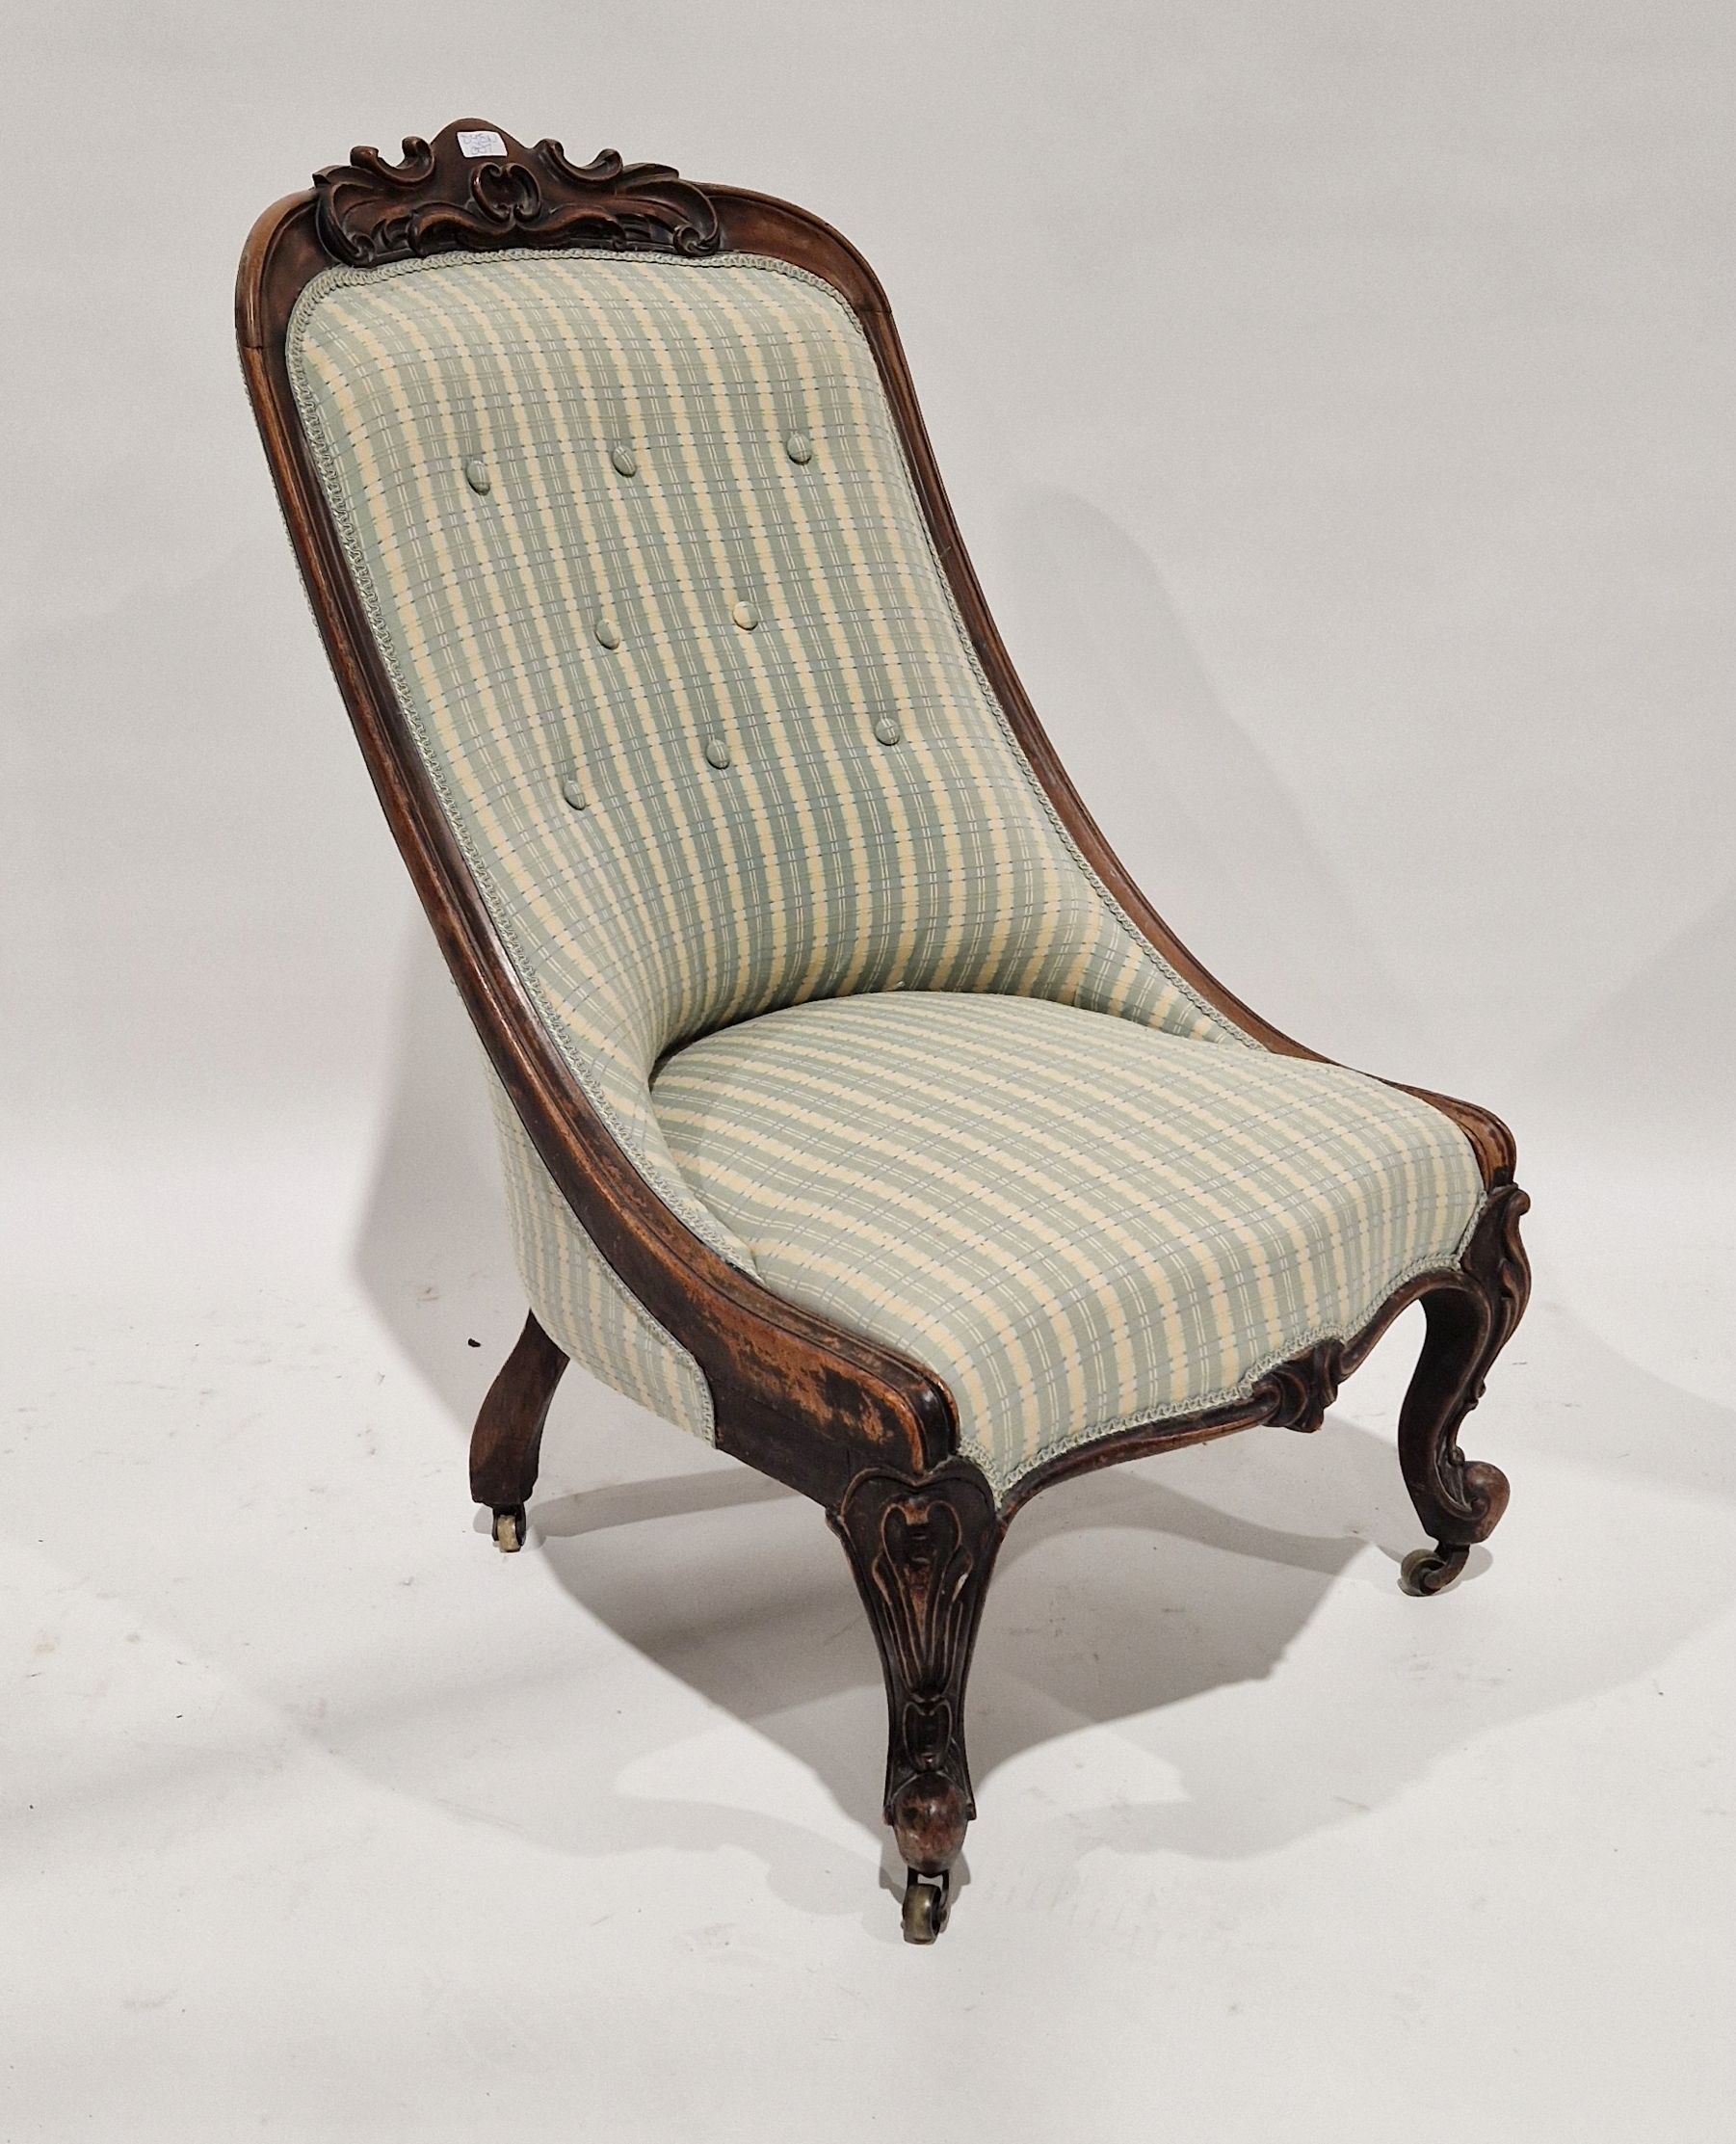 19th century Victorian mahogany button back nursing chair with later upholstery, 95cm high